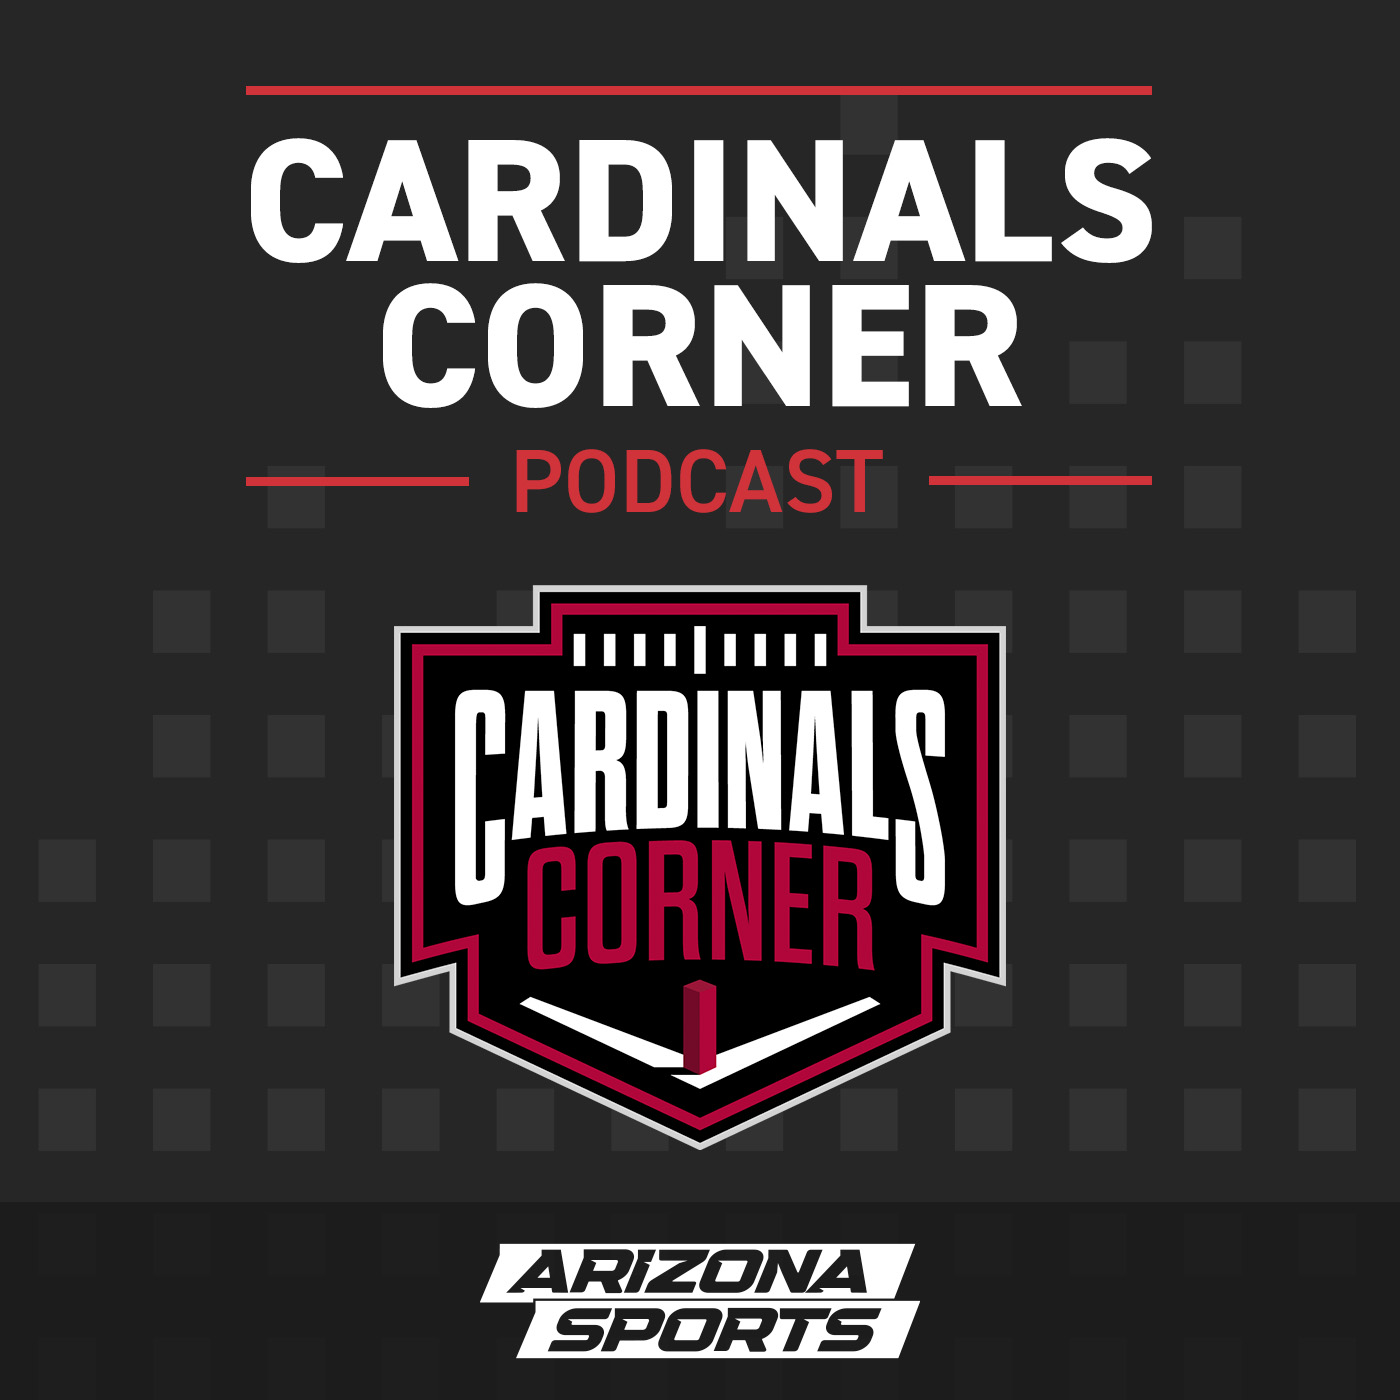 Hope, Hopkins and home victories come back to the Cardinals - October 20